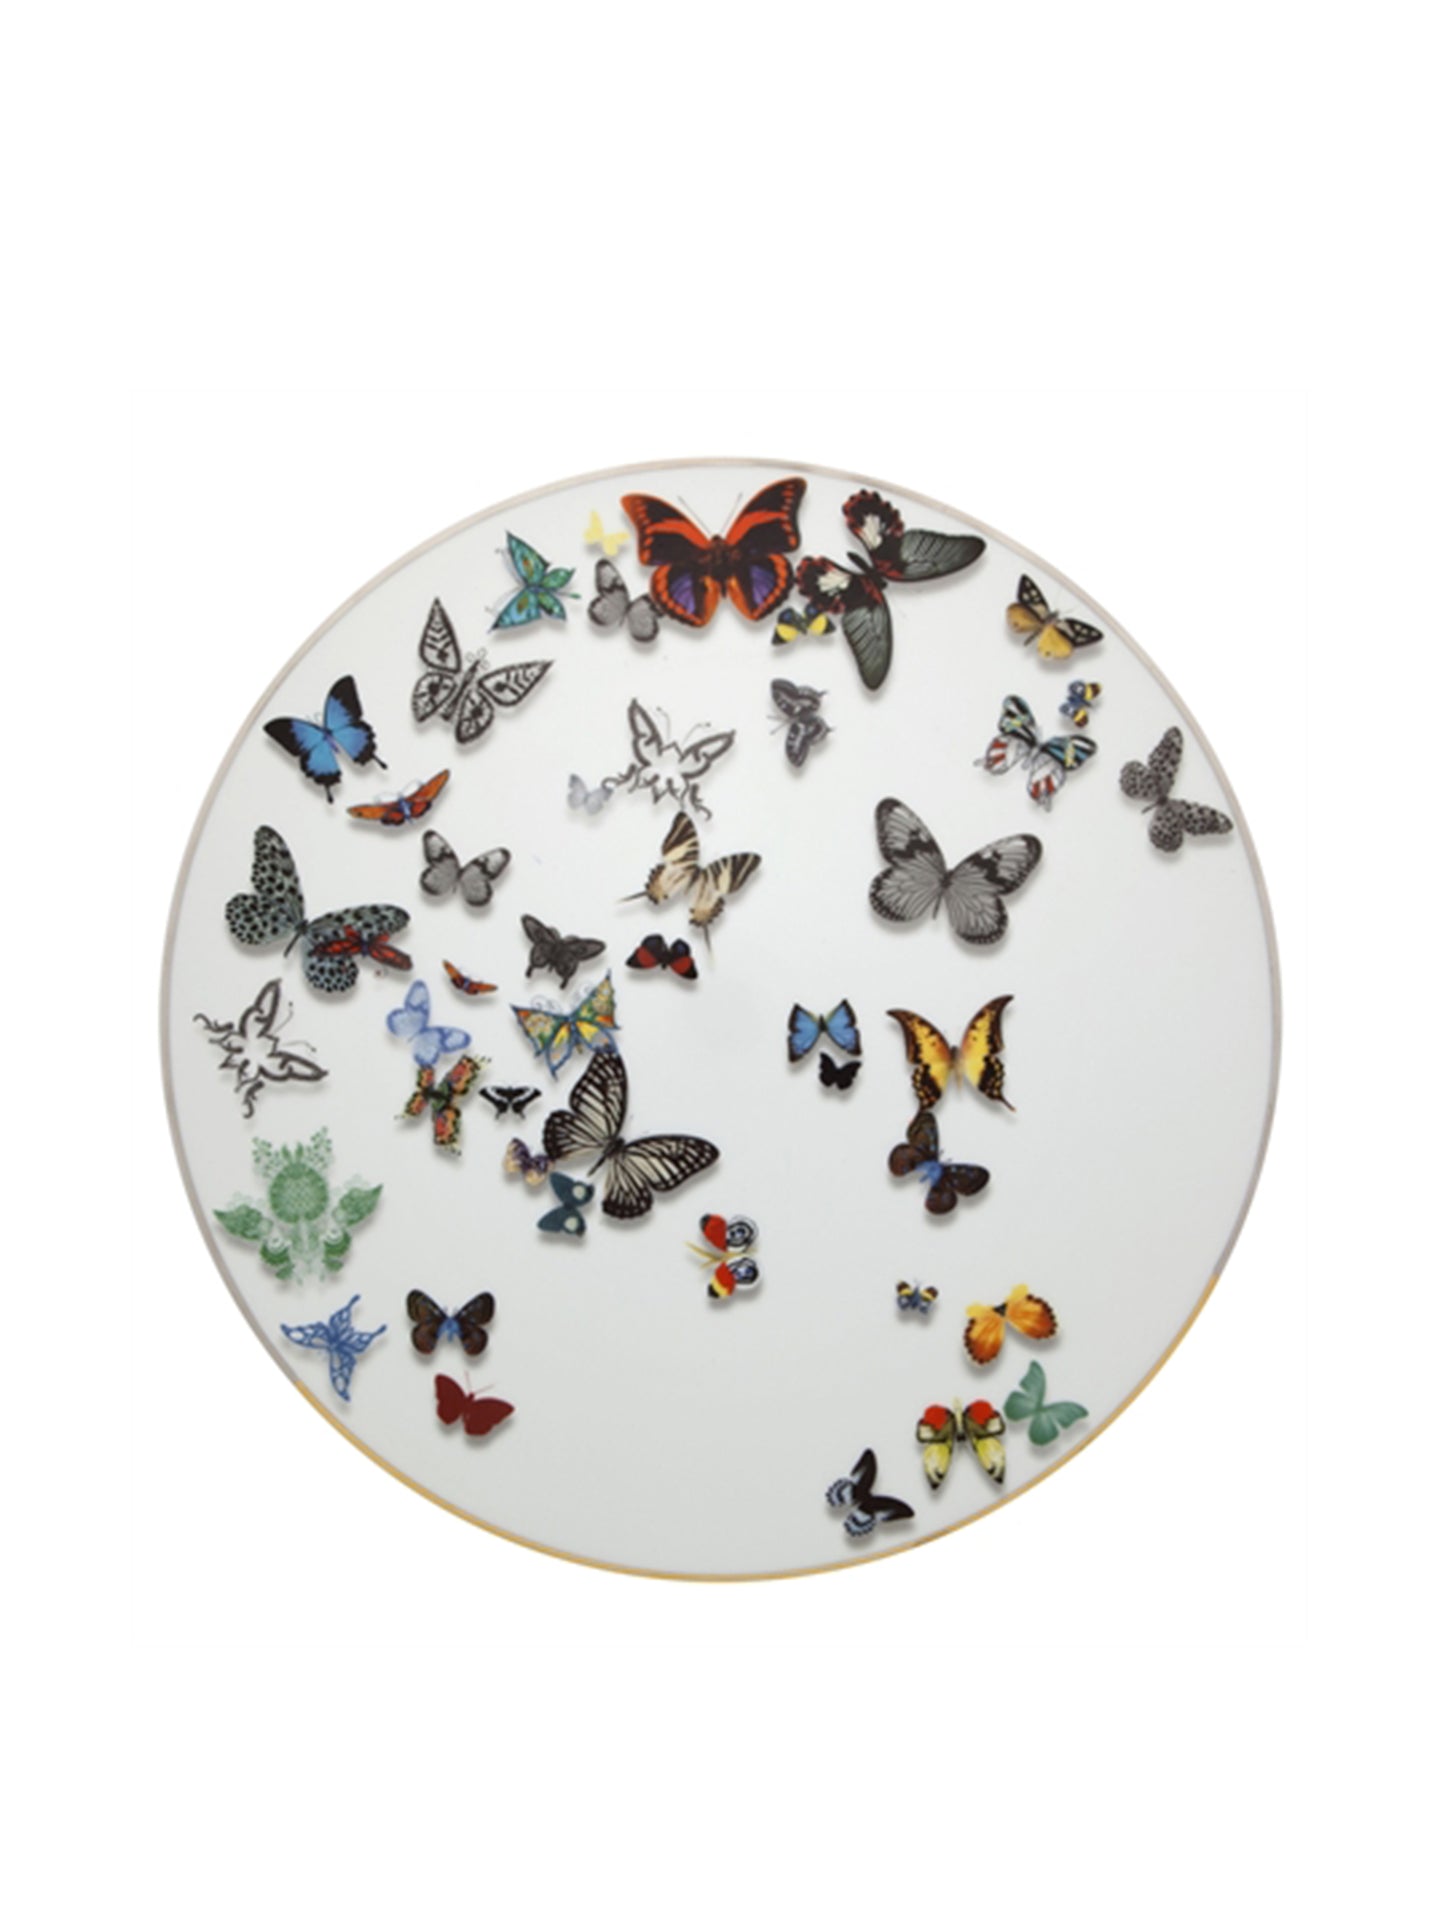 Christian Lacroix Butterfly Parade Charger Plate Weston Table